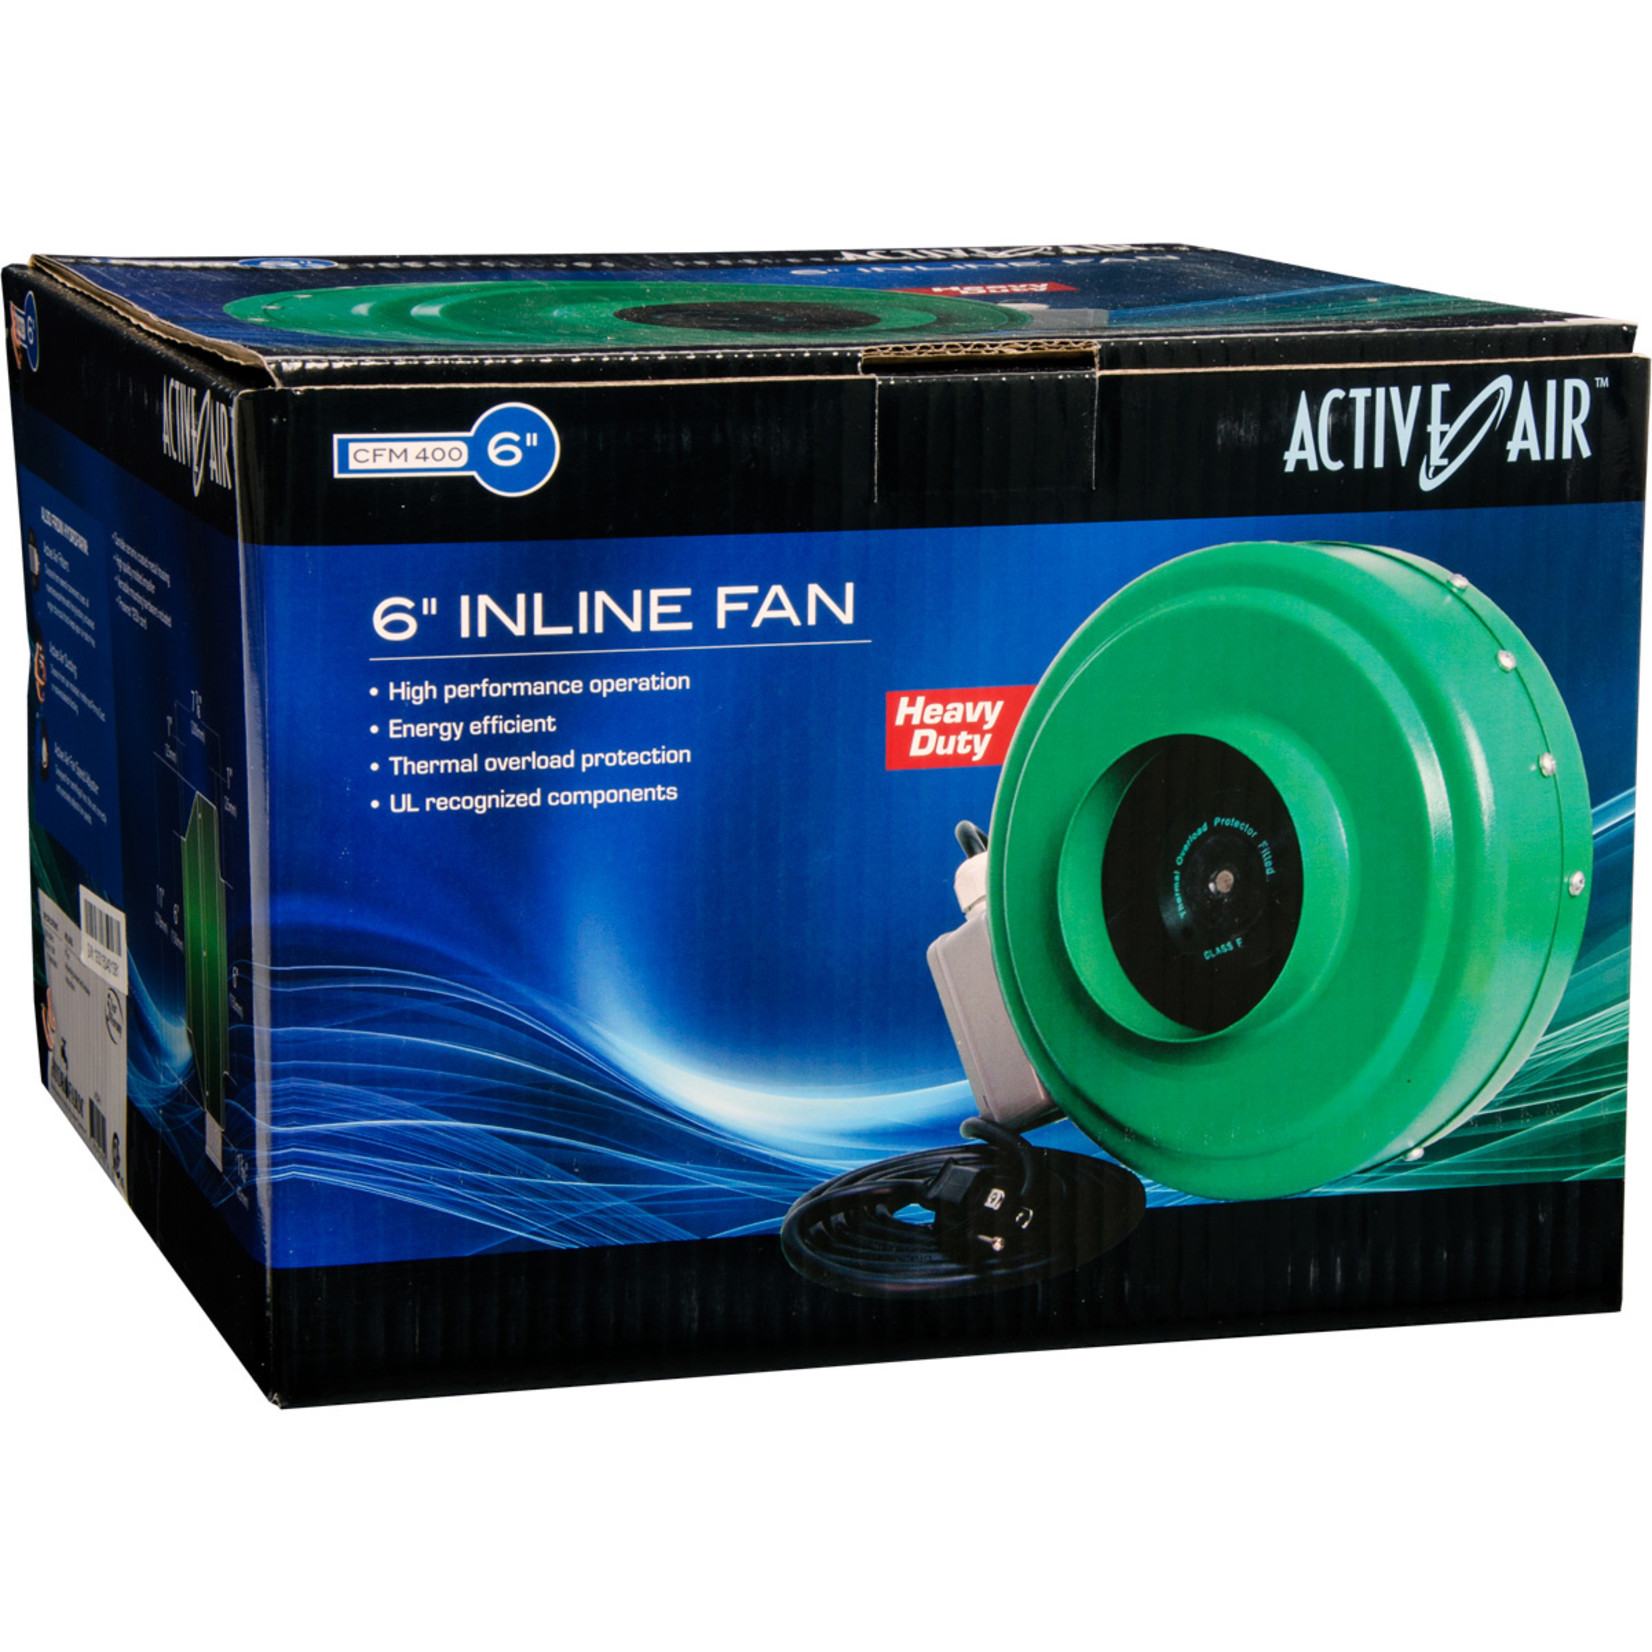 Active Air Active Air 6" In-Line Fan